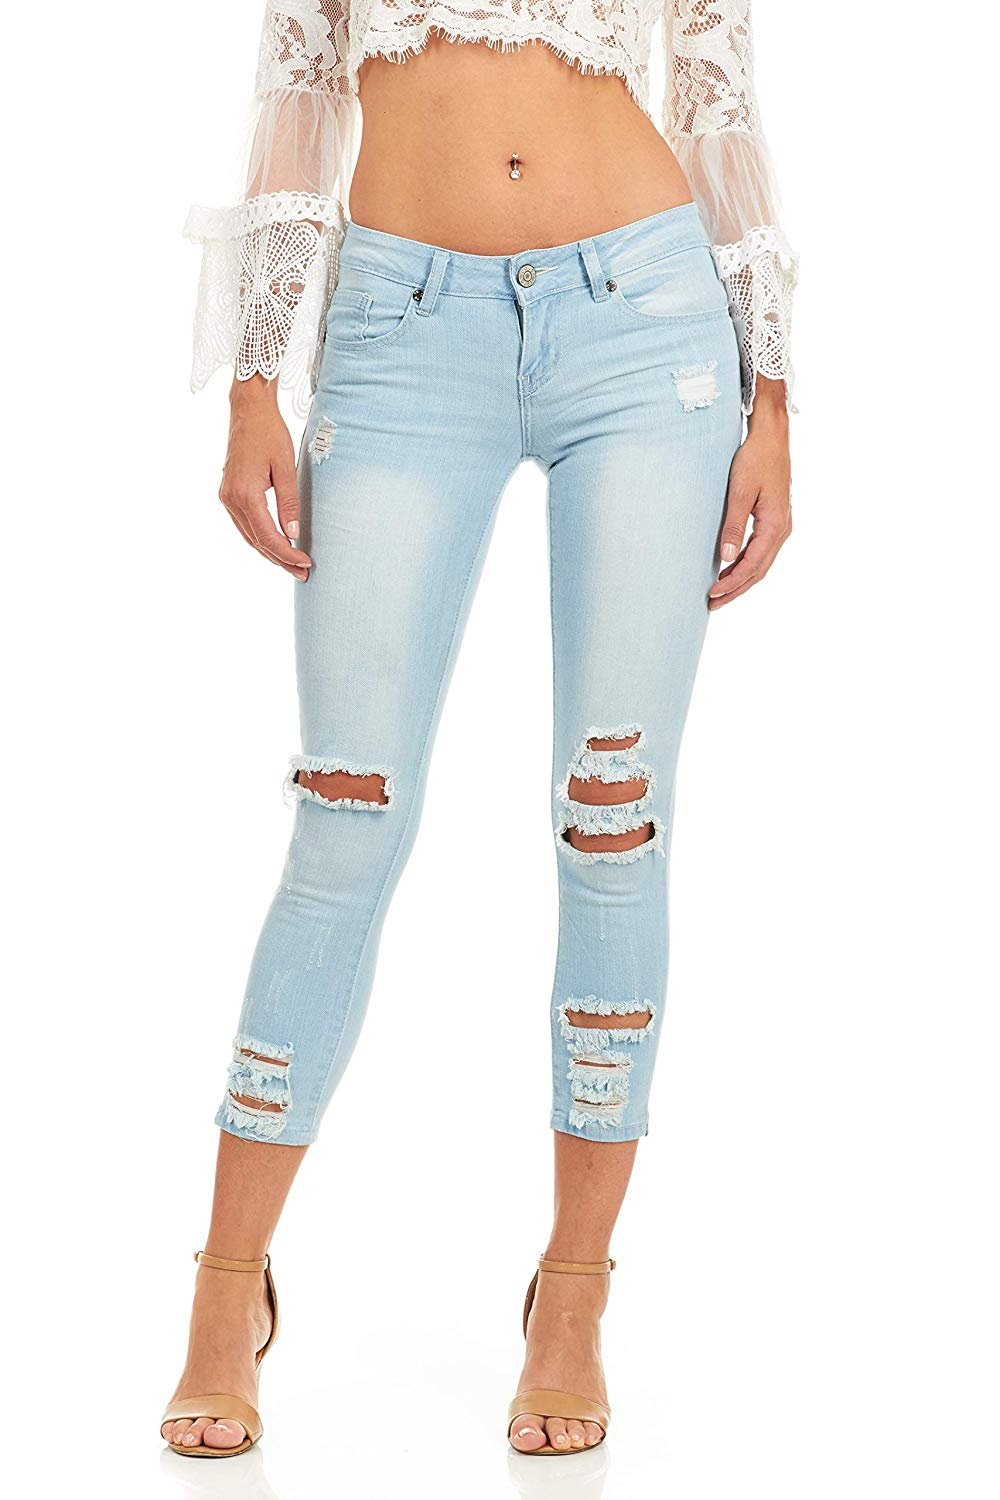 CG JEANS Plus Size Cute Juniors Big Mid Rise Large Ripped Torn Crop Skinny Fit, Sky Blue Denim, 20 - image 1 of 5